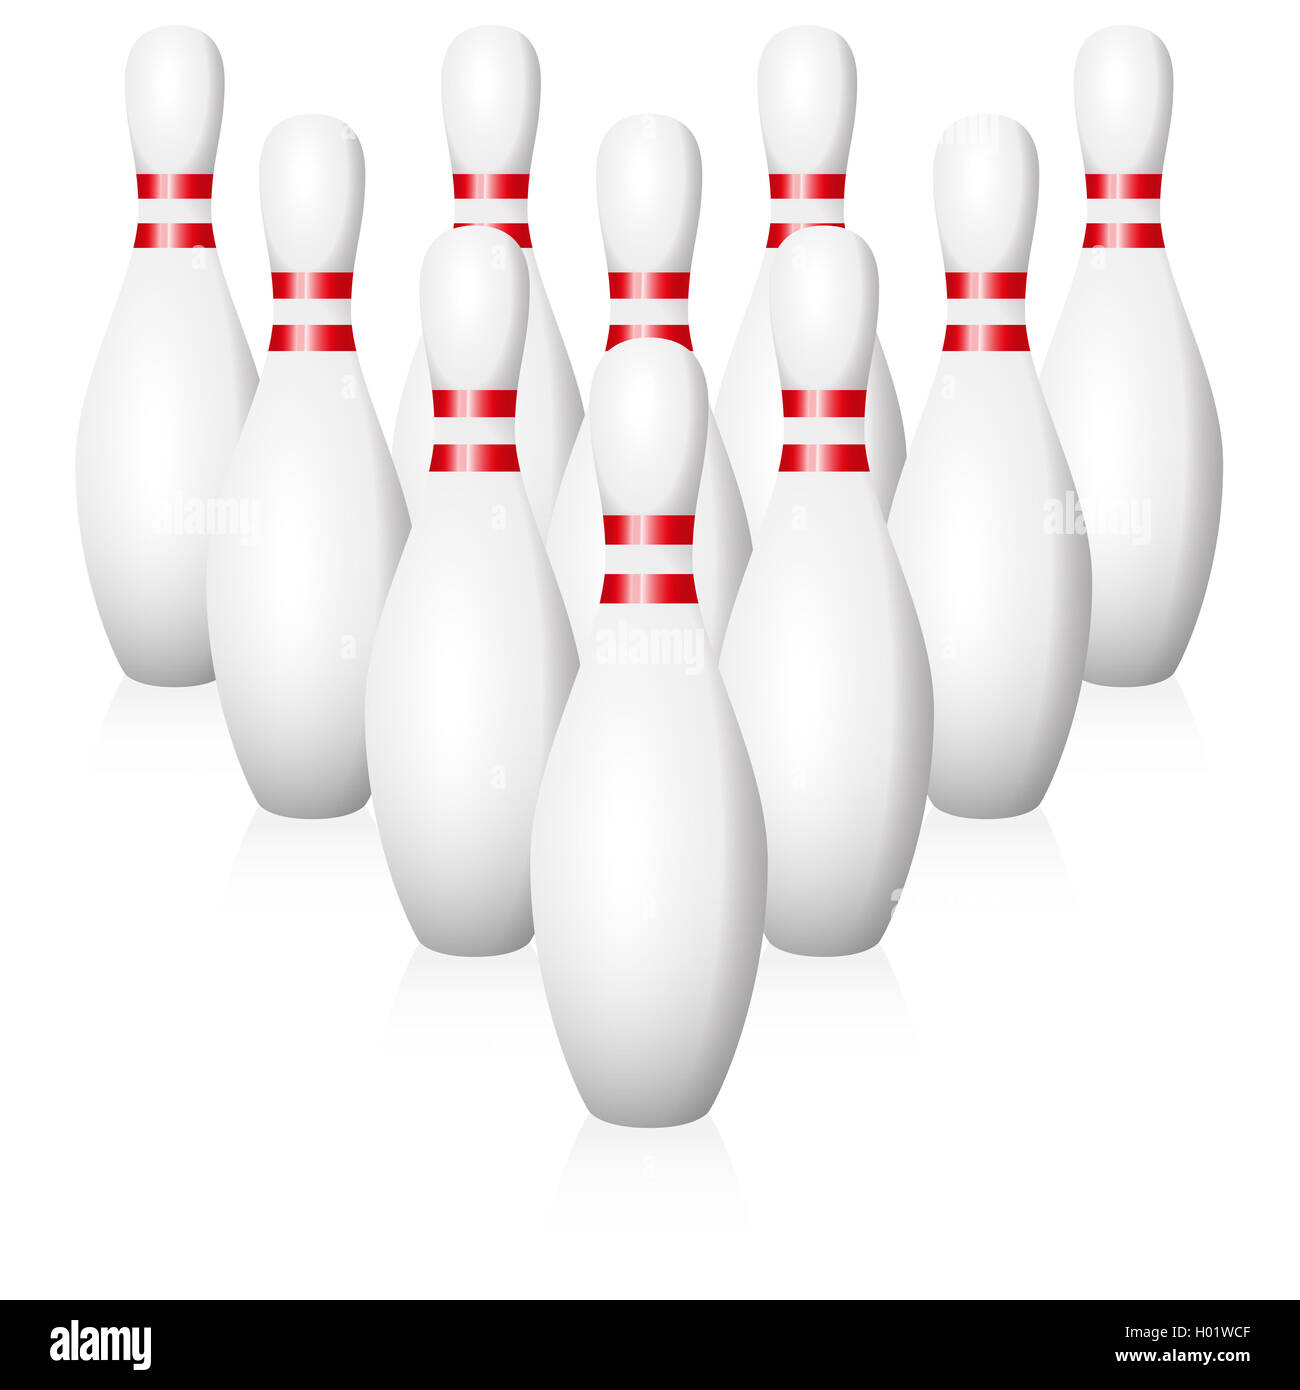 Bowling pins - starting position - illustration on white background. Stock Photo